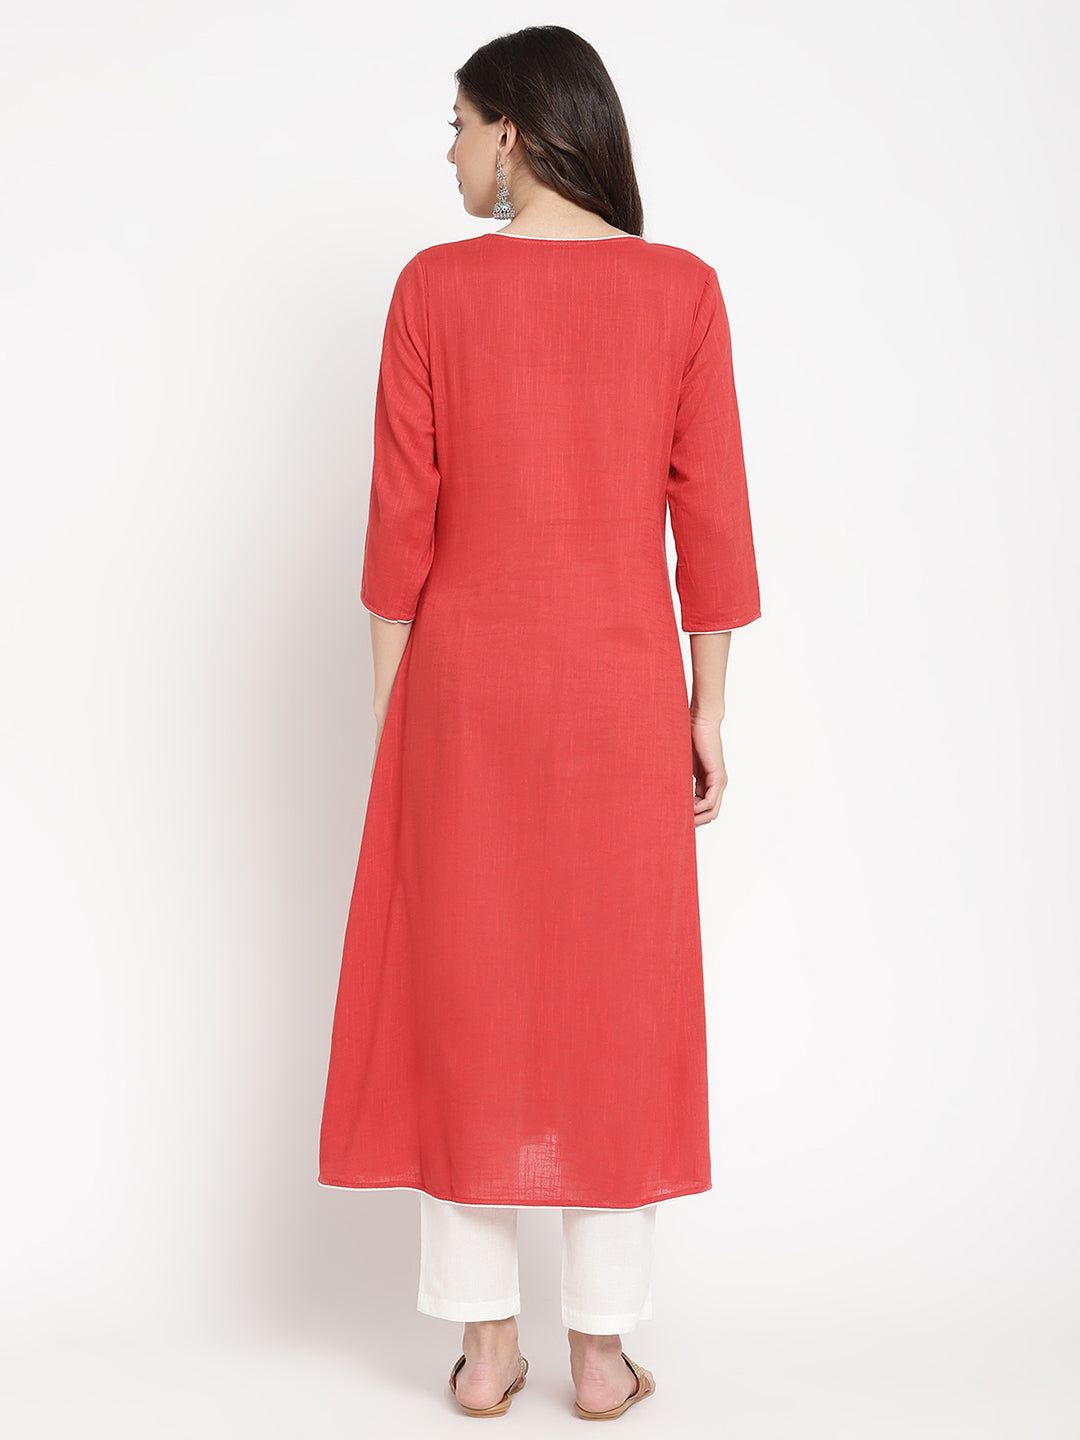 Woman wearing a red embroidered Kurta in an A-line silhouette. 